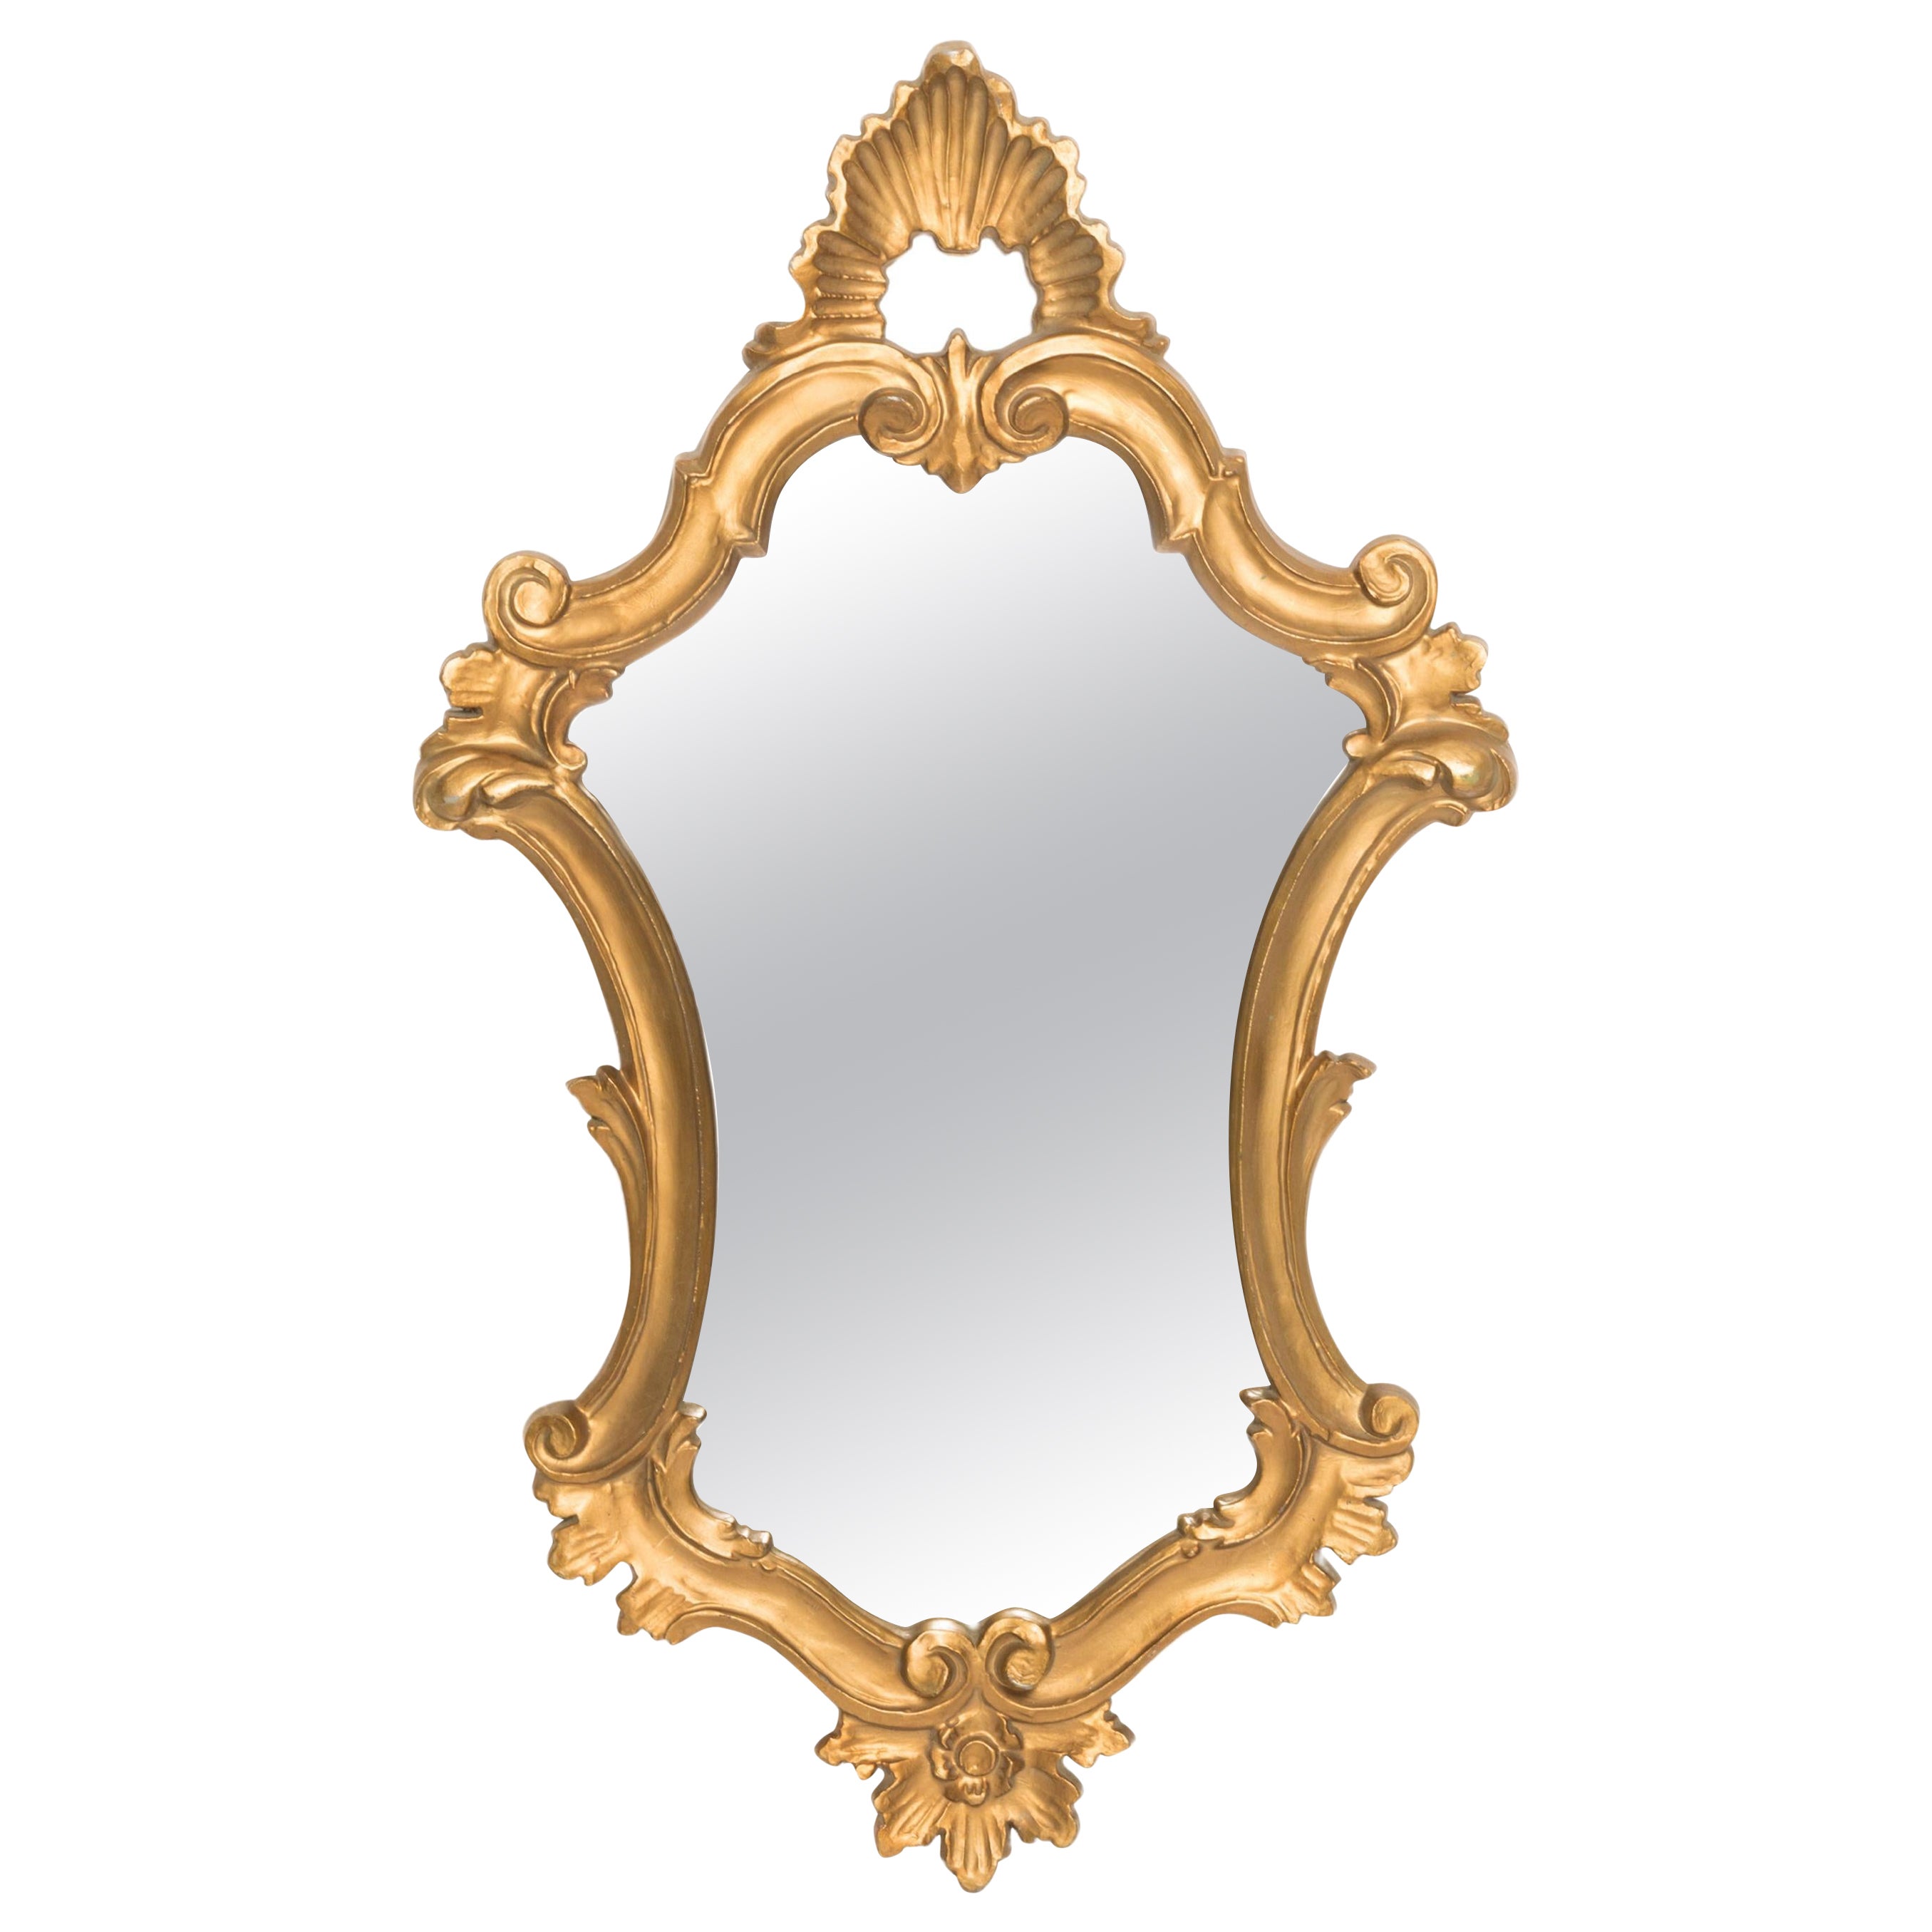 Medium Decorative Vintage Mirror in Gold Frame with Flowers, Italy, 1960s